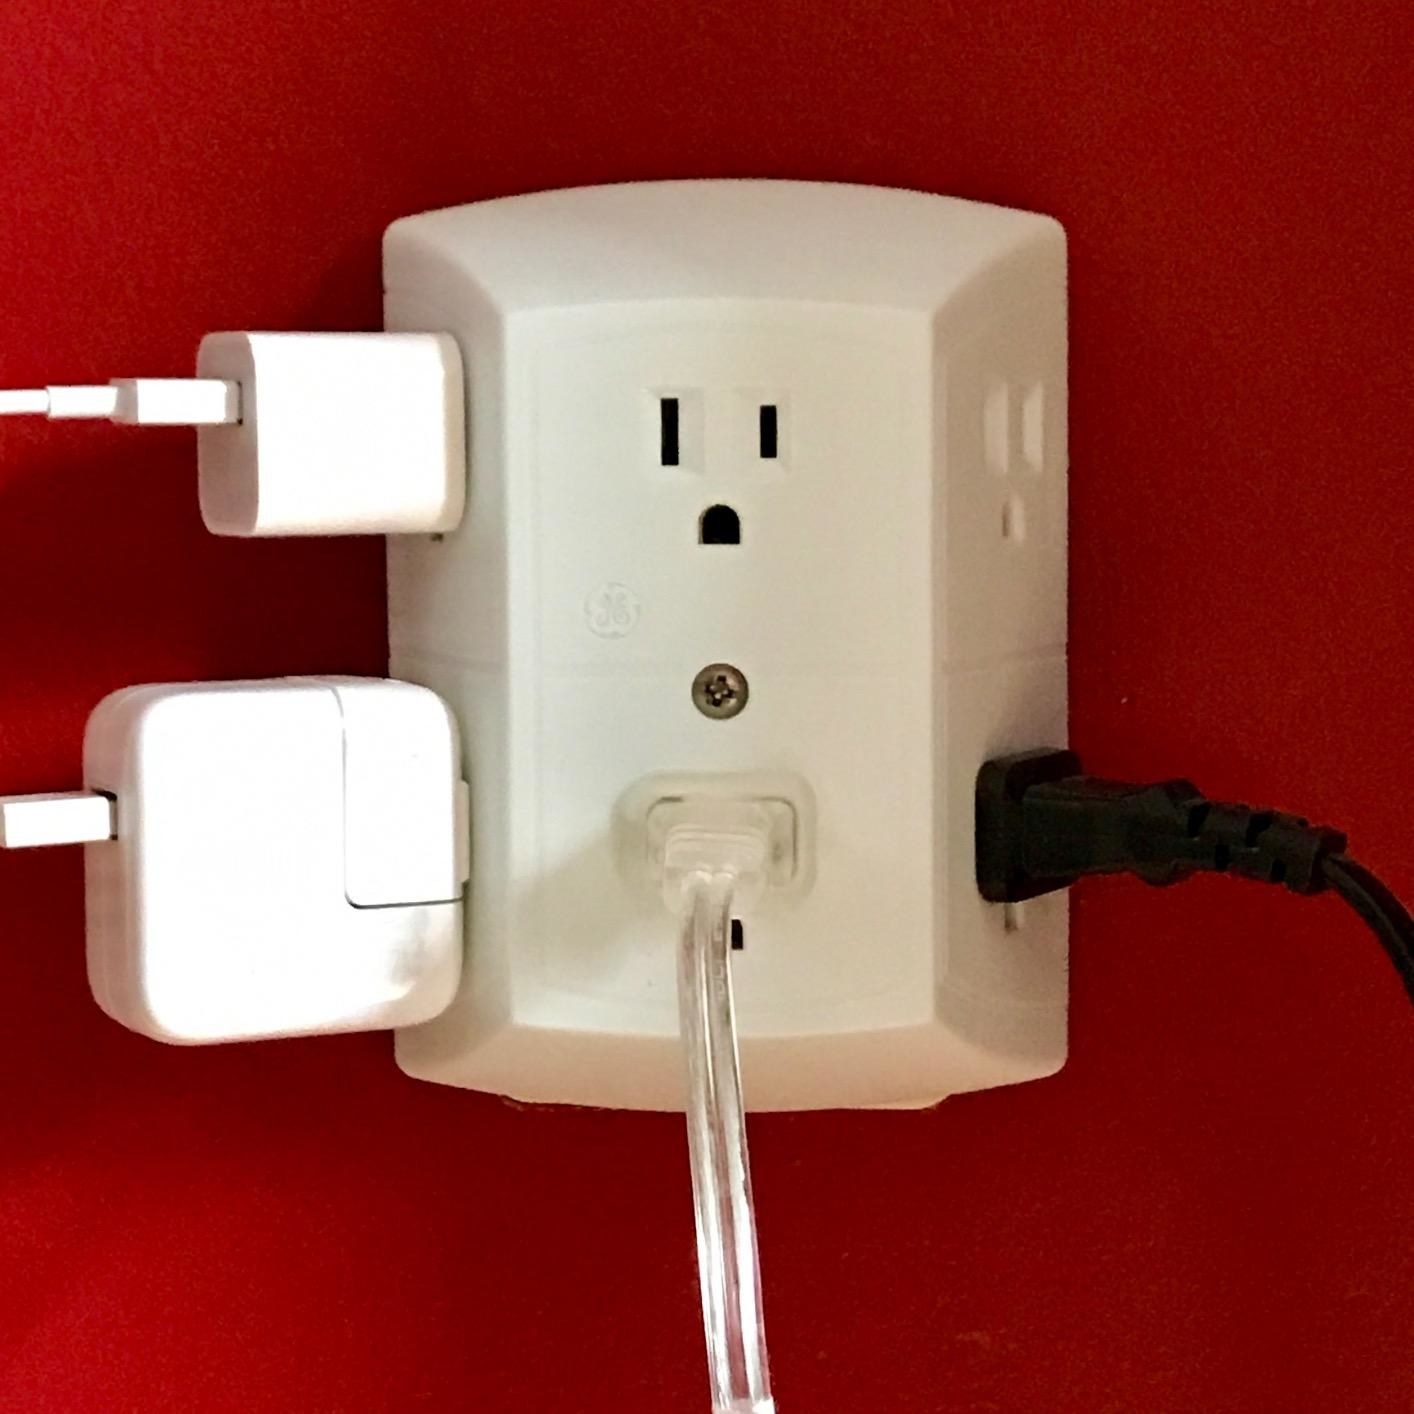 Reviewer power cord plugged into to outlet